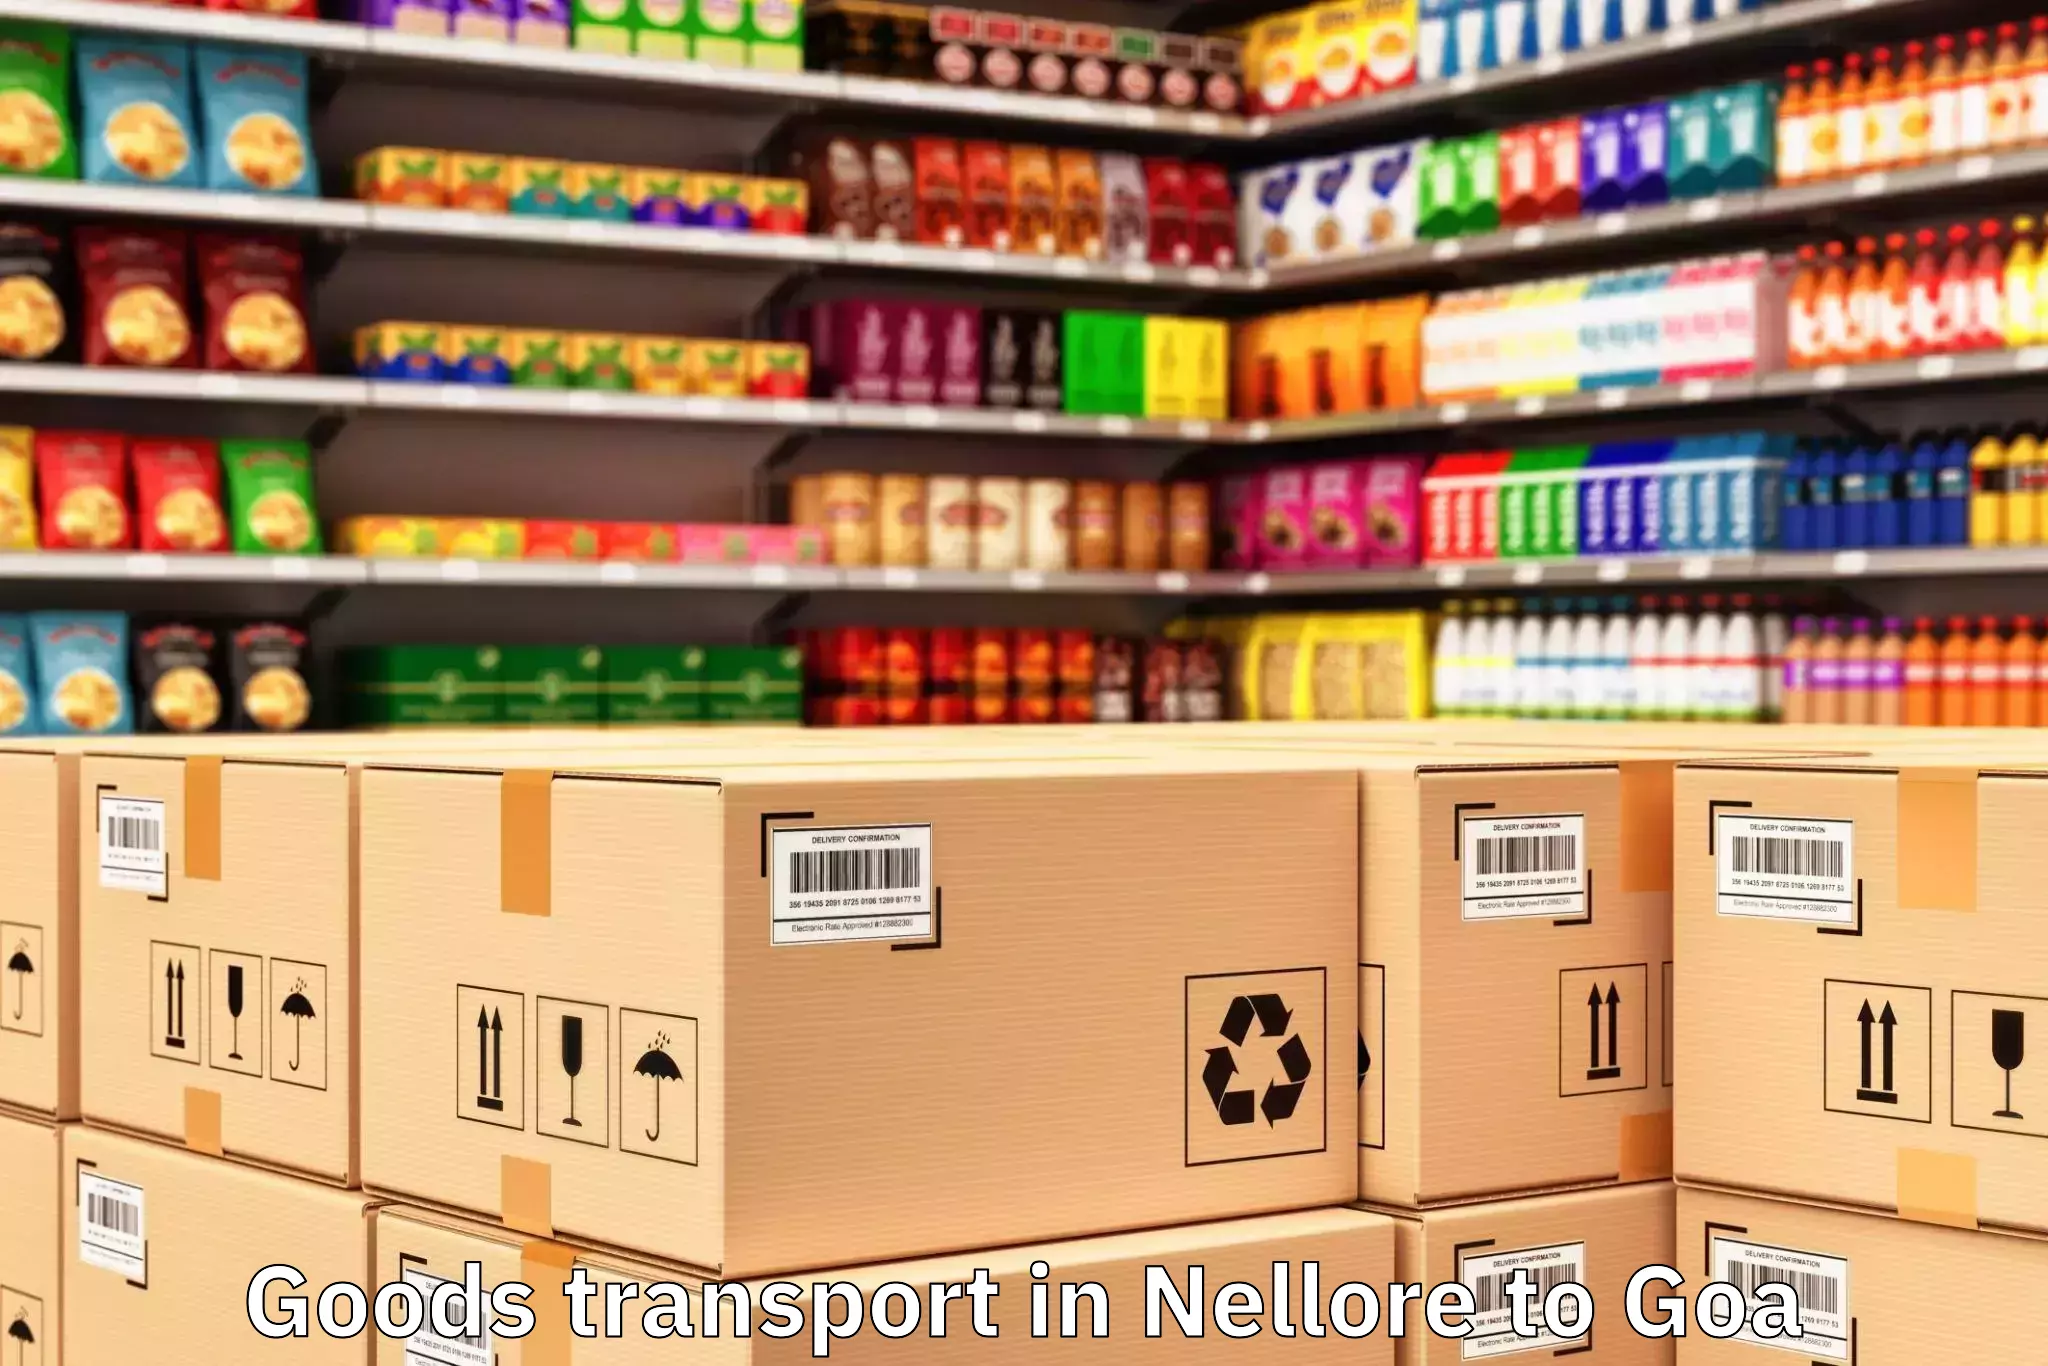 Easy Nellore to Goa Goods Transport Booking